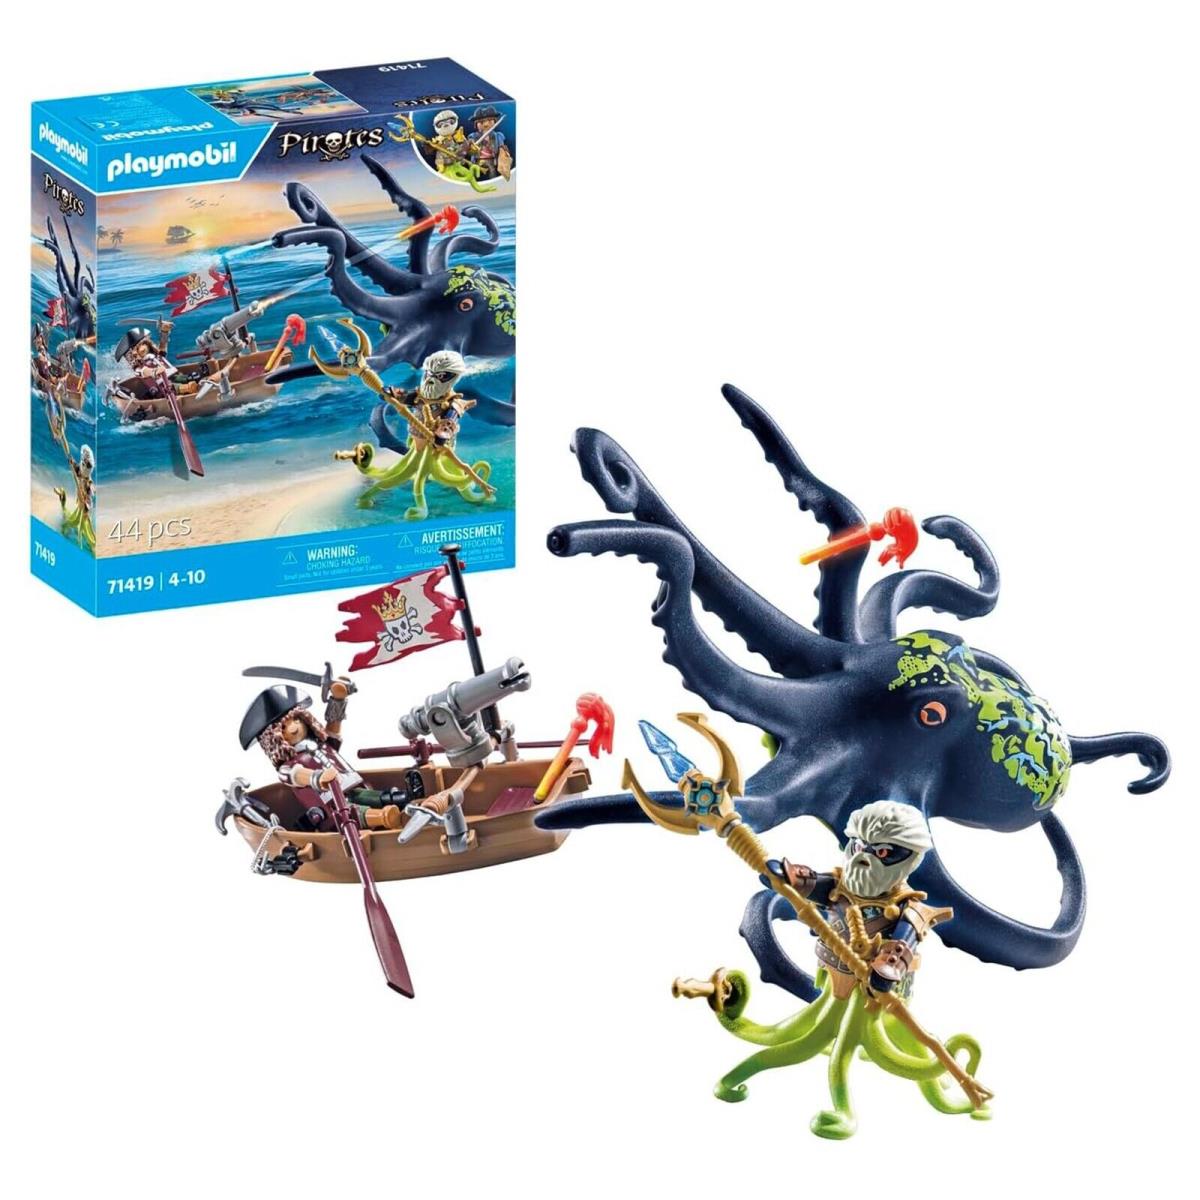 Playmobil Pirates Battle with The Giant Octopus Building Set 71419 IN Stock